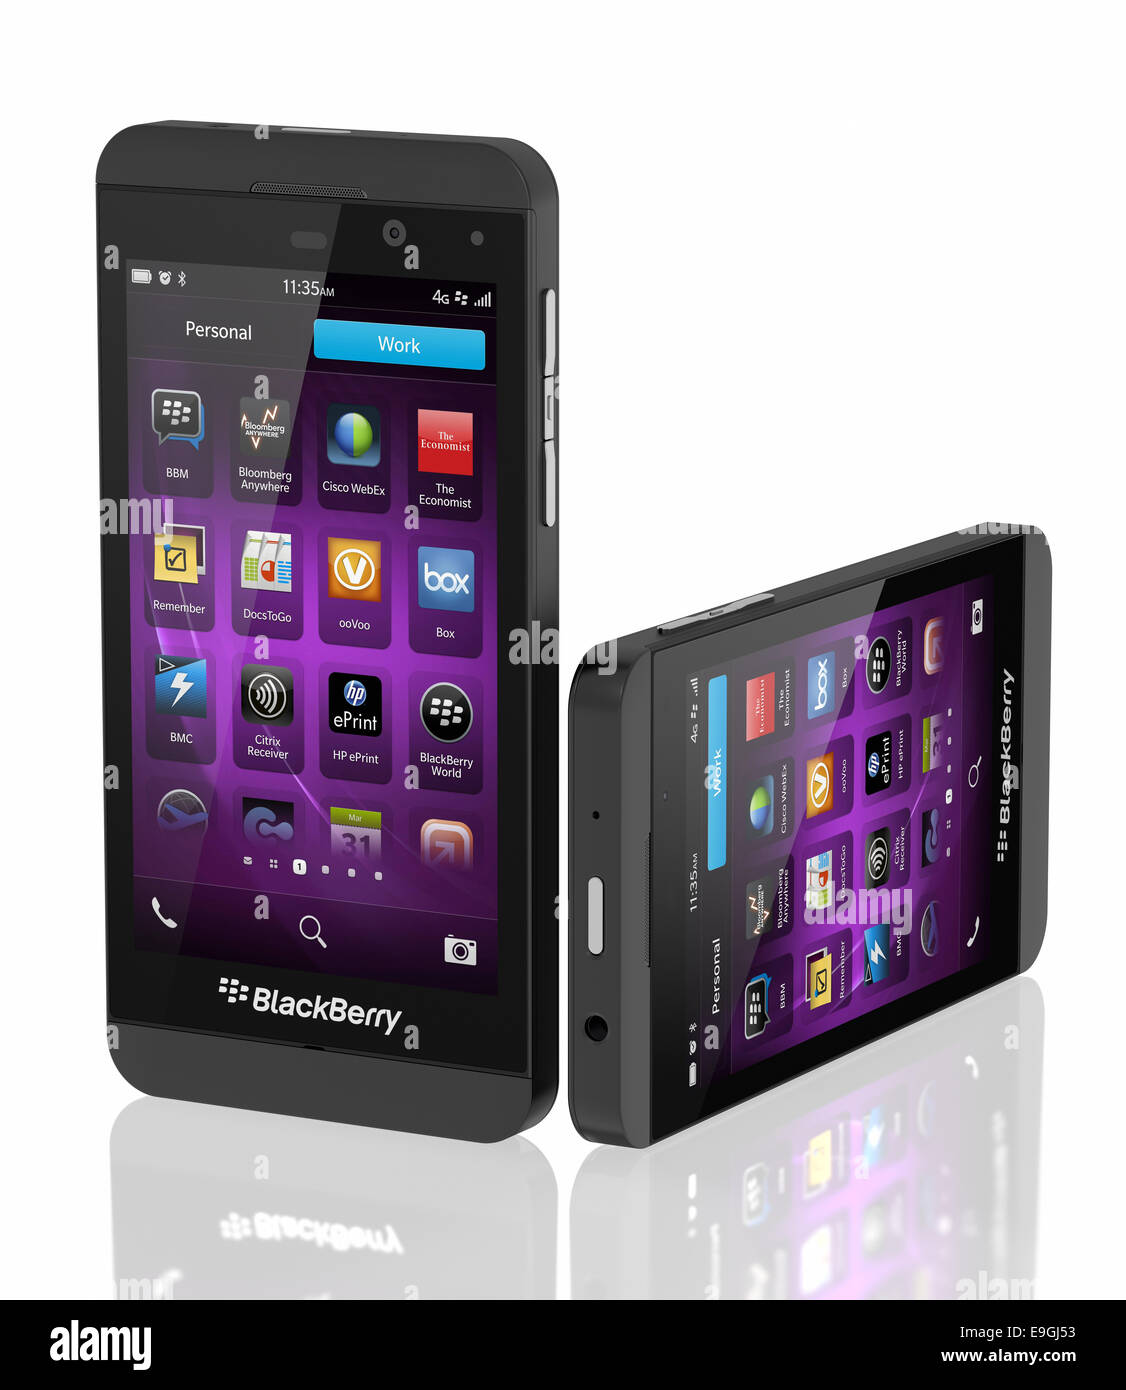 BlackBerry Z10 that powers the phone is a modern operating system with a brand new gesture Stock Photo